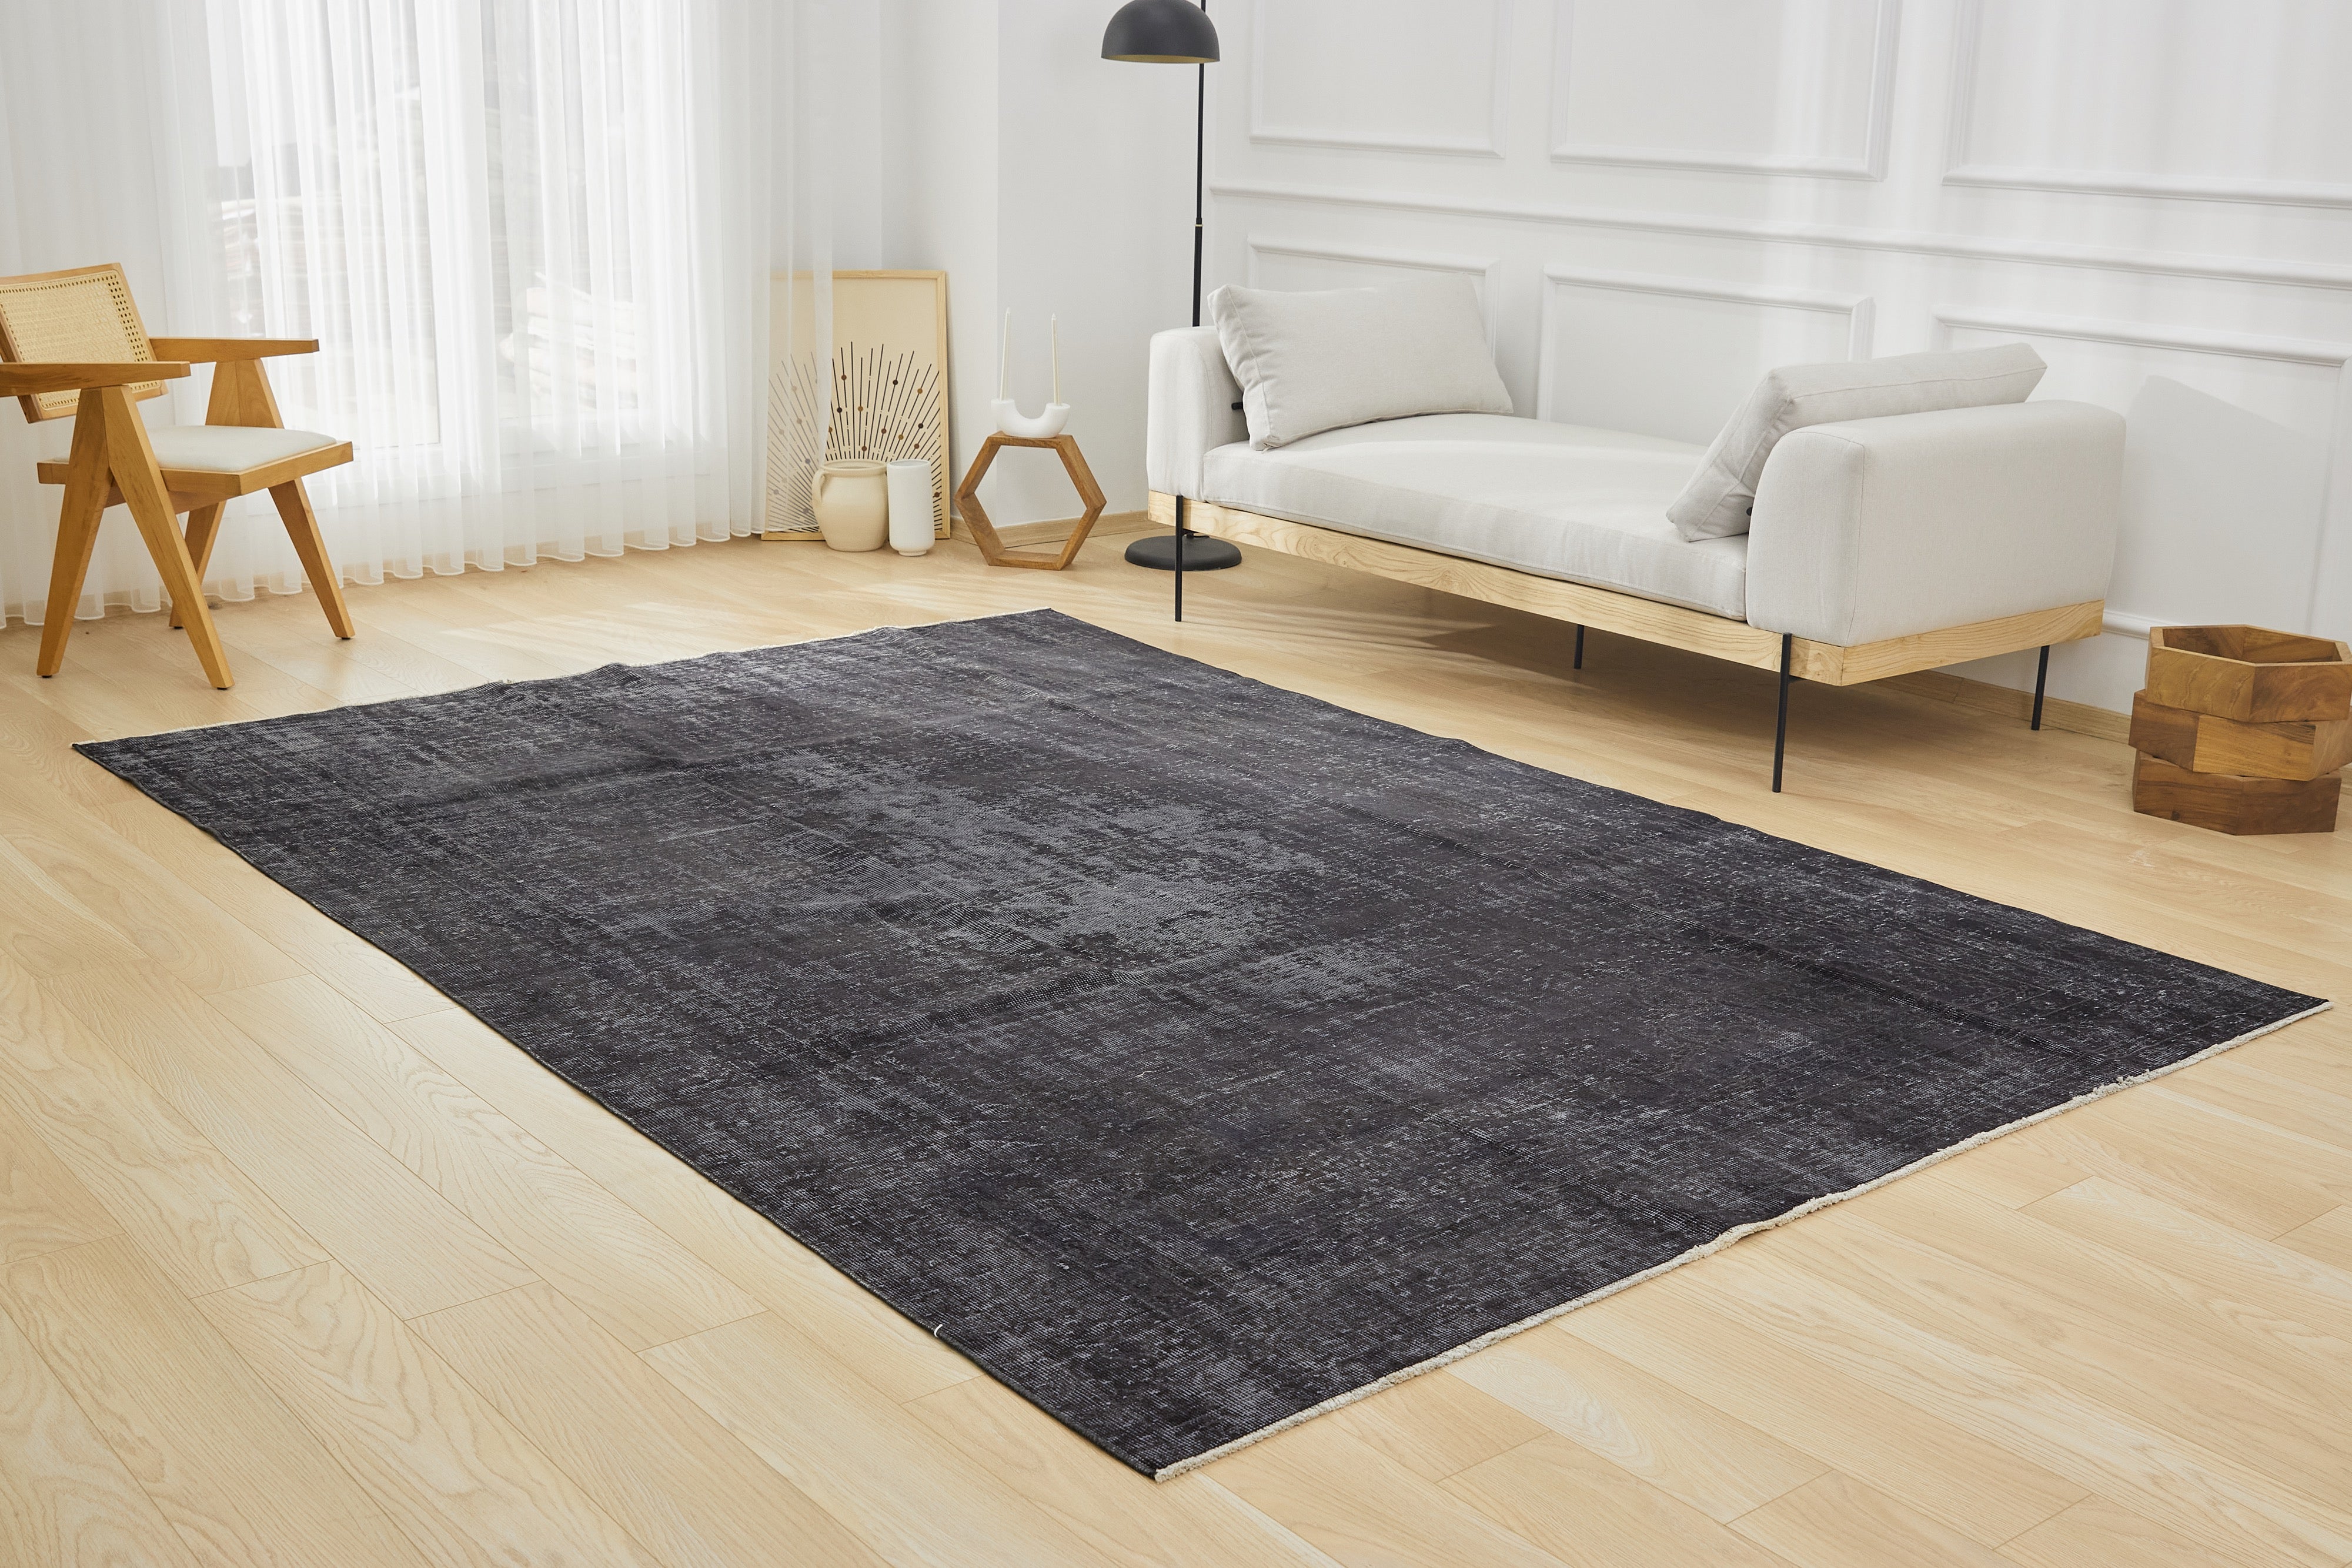 Black Overdyed Elegance - Yseult's Professional Carpet Artistry | Kuden Rugs